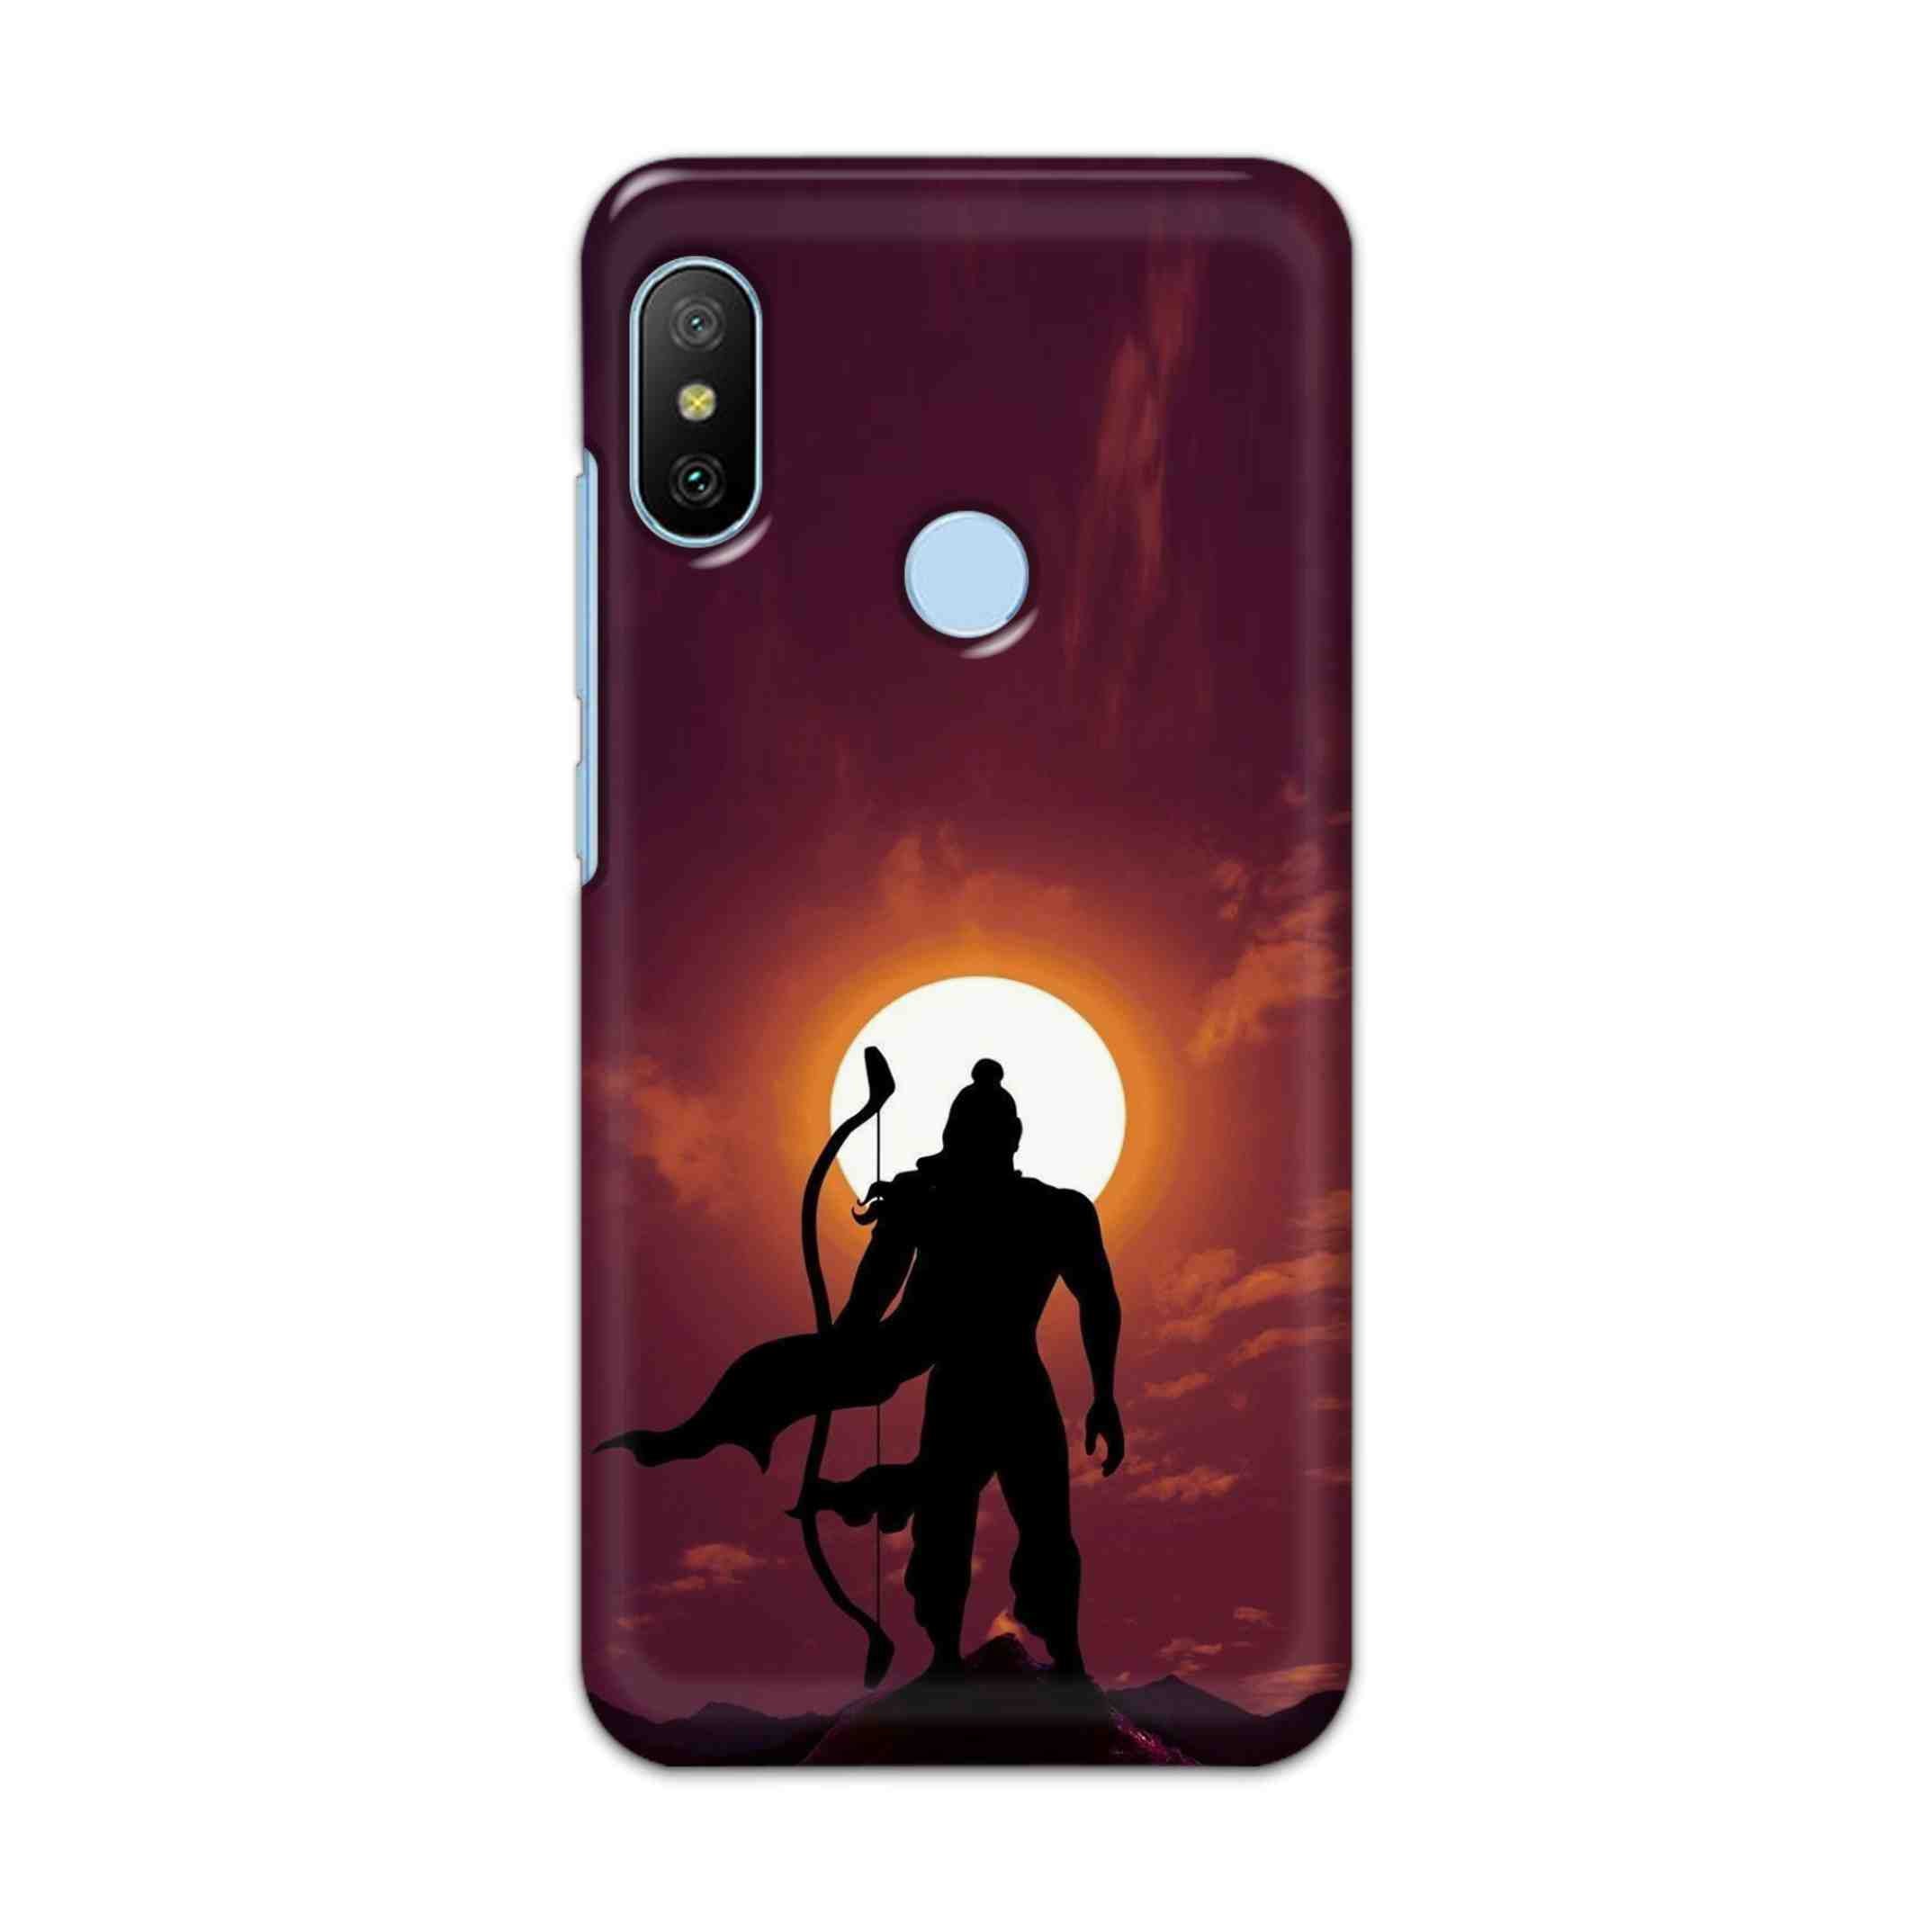 Buy Ram Hard Back Mobile Phone Case/Cover For Xiaomi Redmi 6 Pro Online